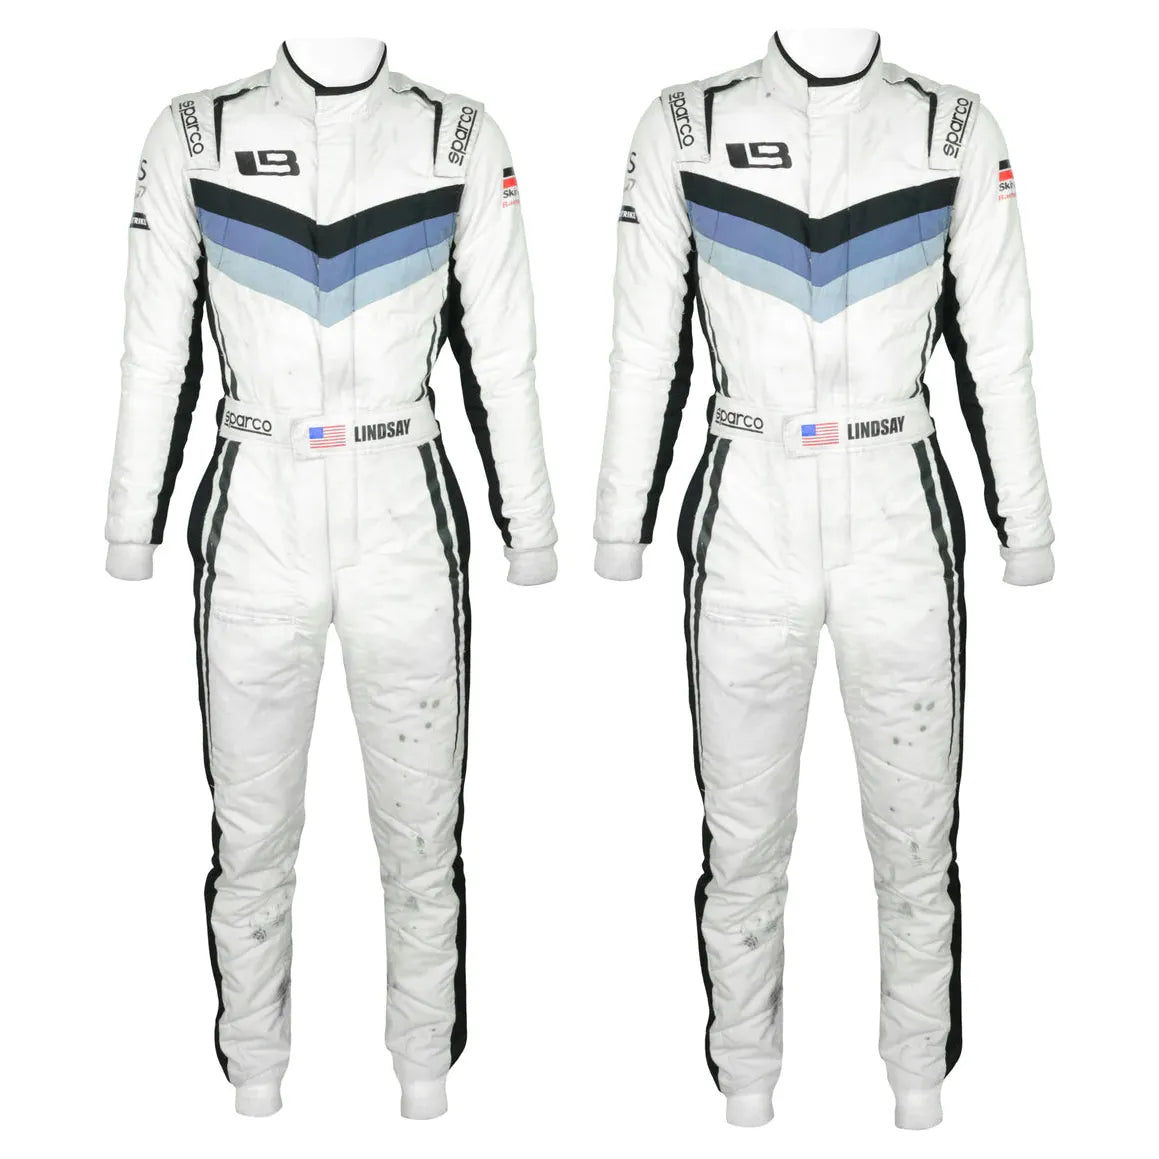 Go kart racing Sublimation Protective clothing Racing gear Suit N-051